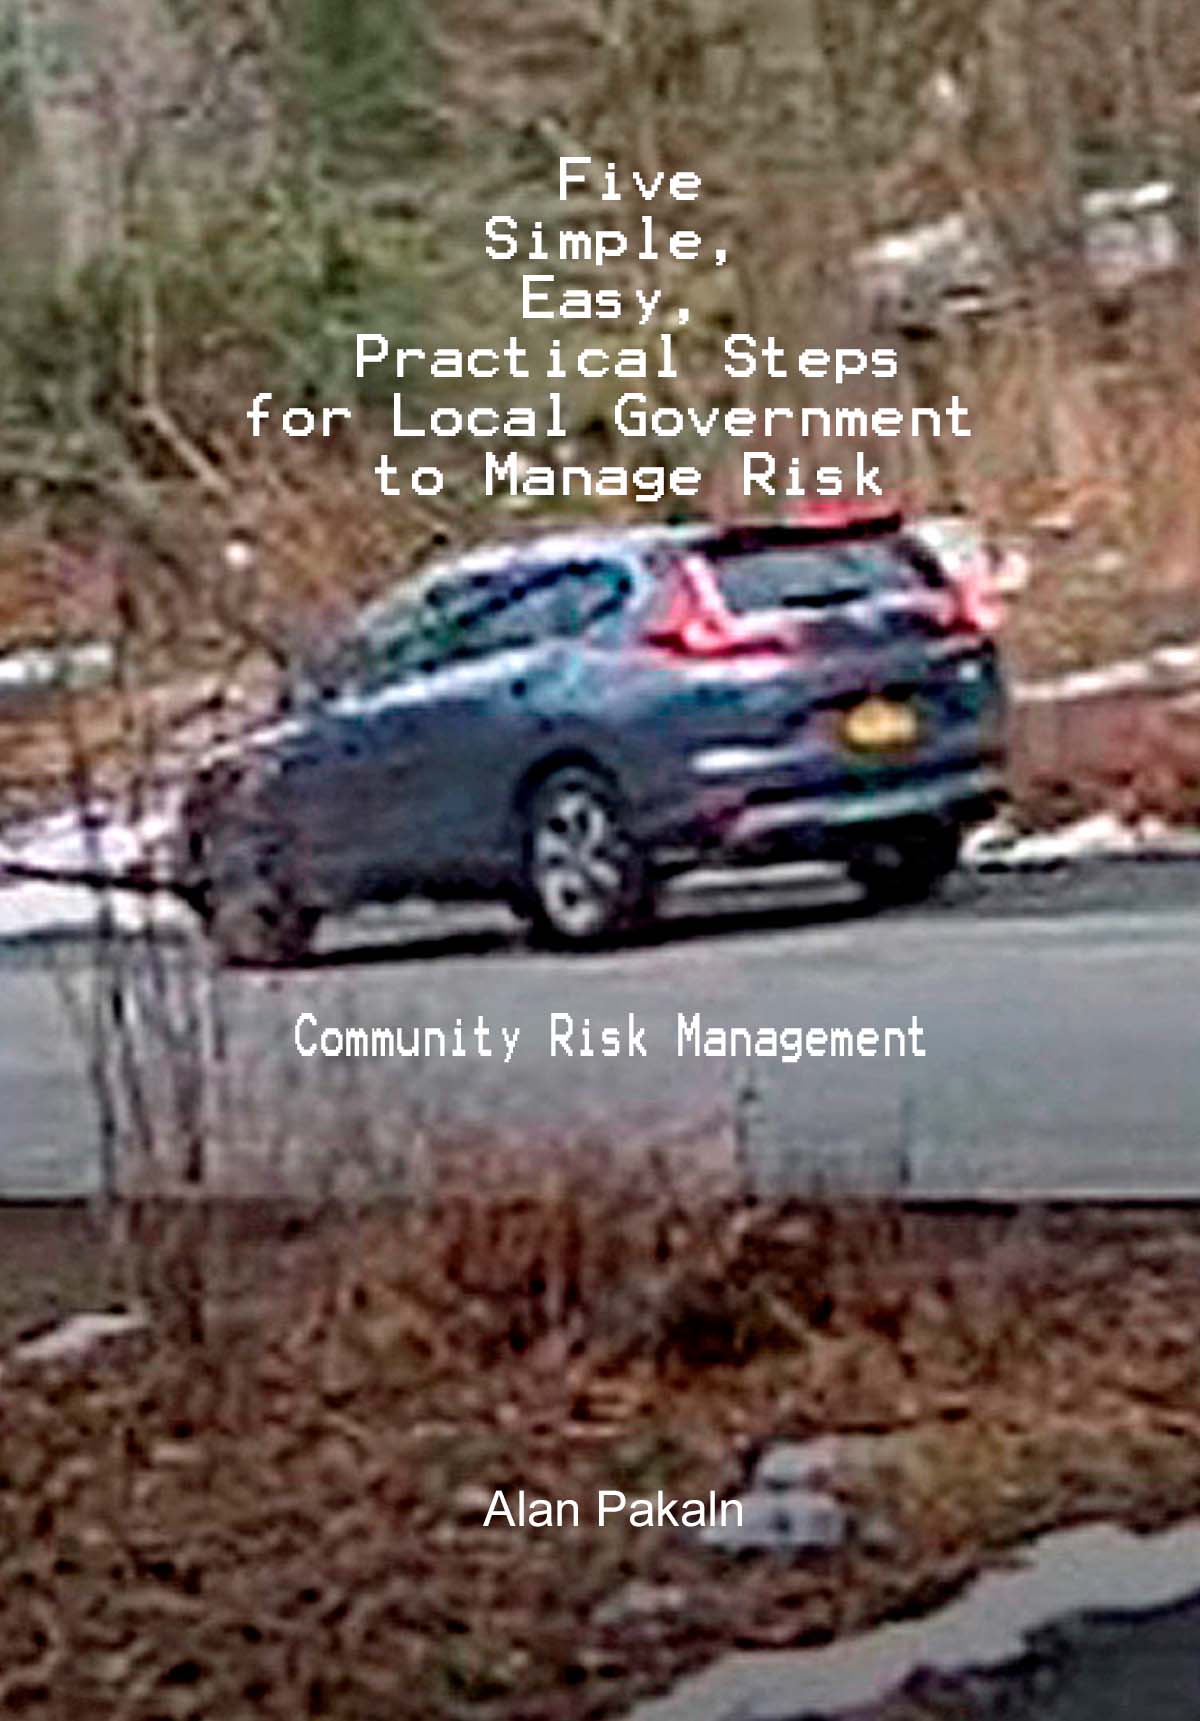 Five Simple, Easy, Practical Steps for Local Government to Manage Risk: Community Risk Management